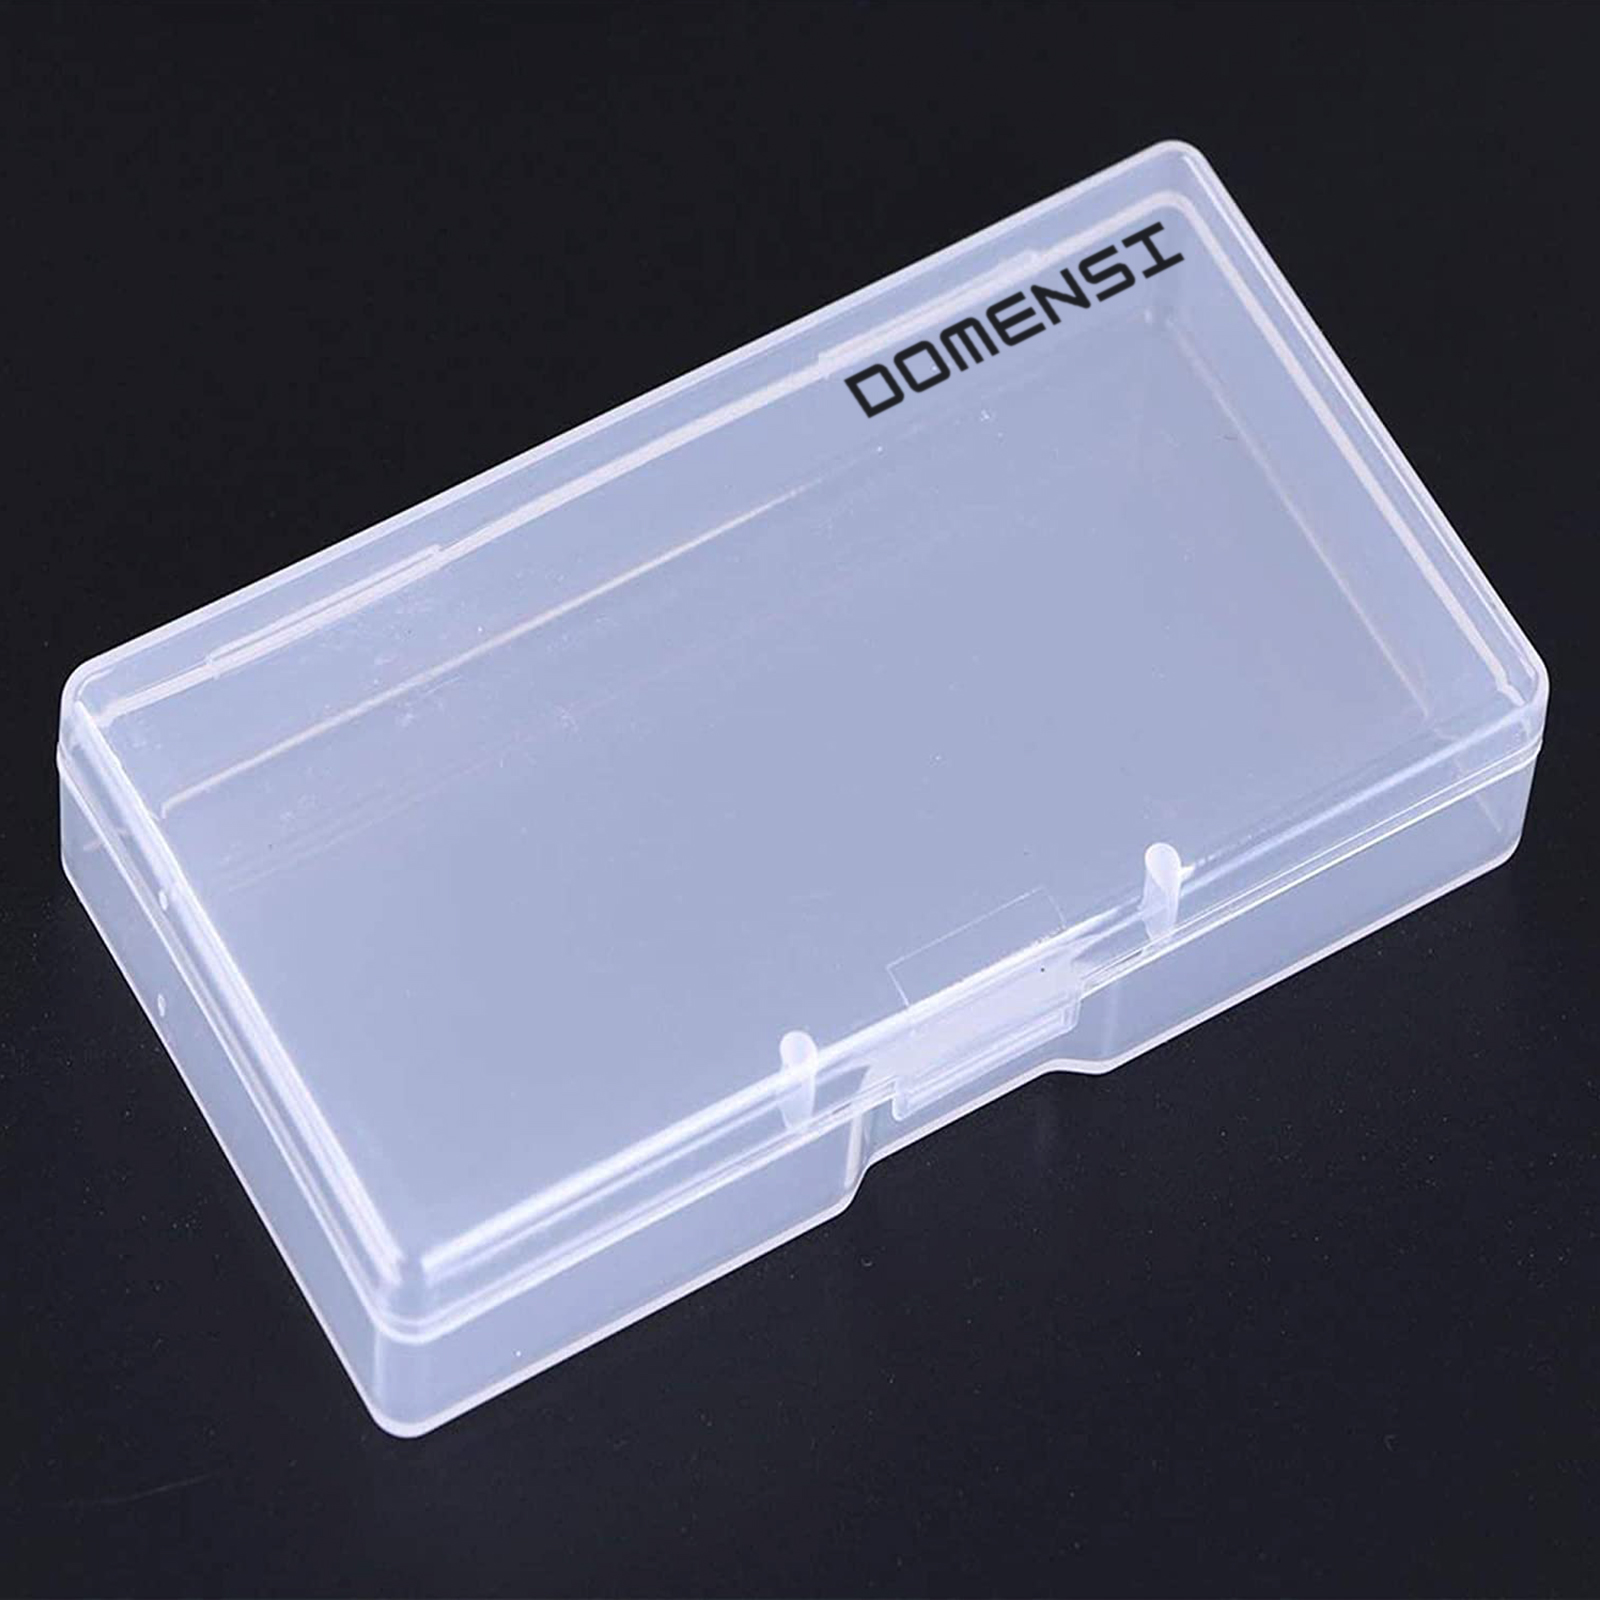 Domensi 12 Pack Clear Plastic Beads Storage Containers Box with